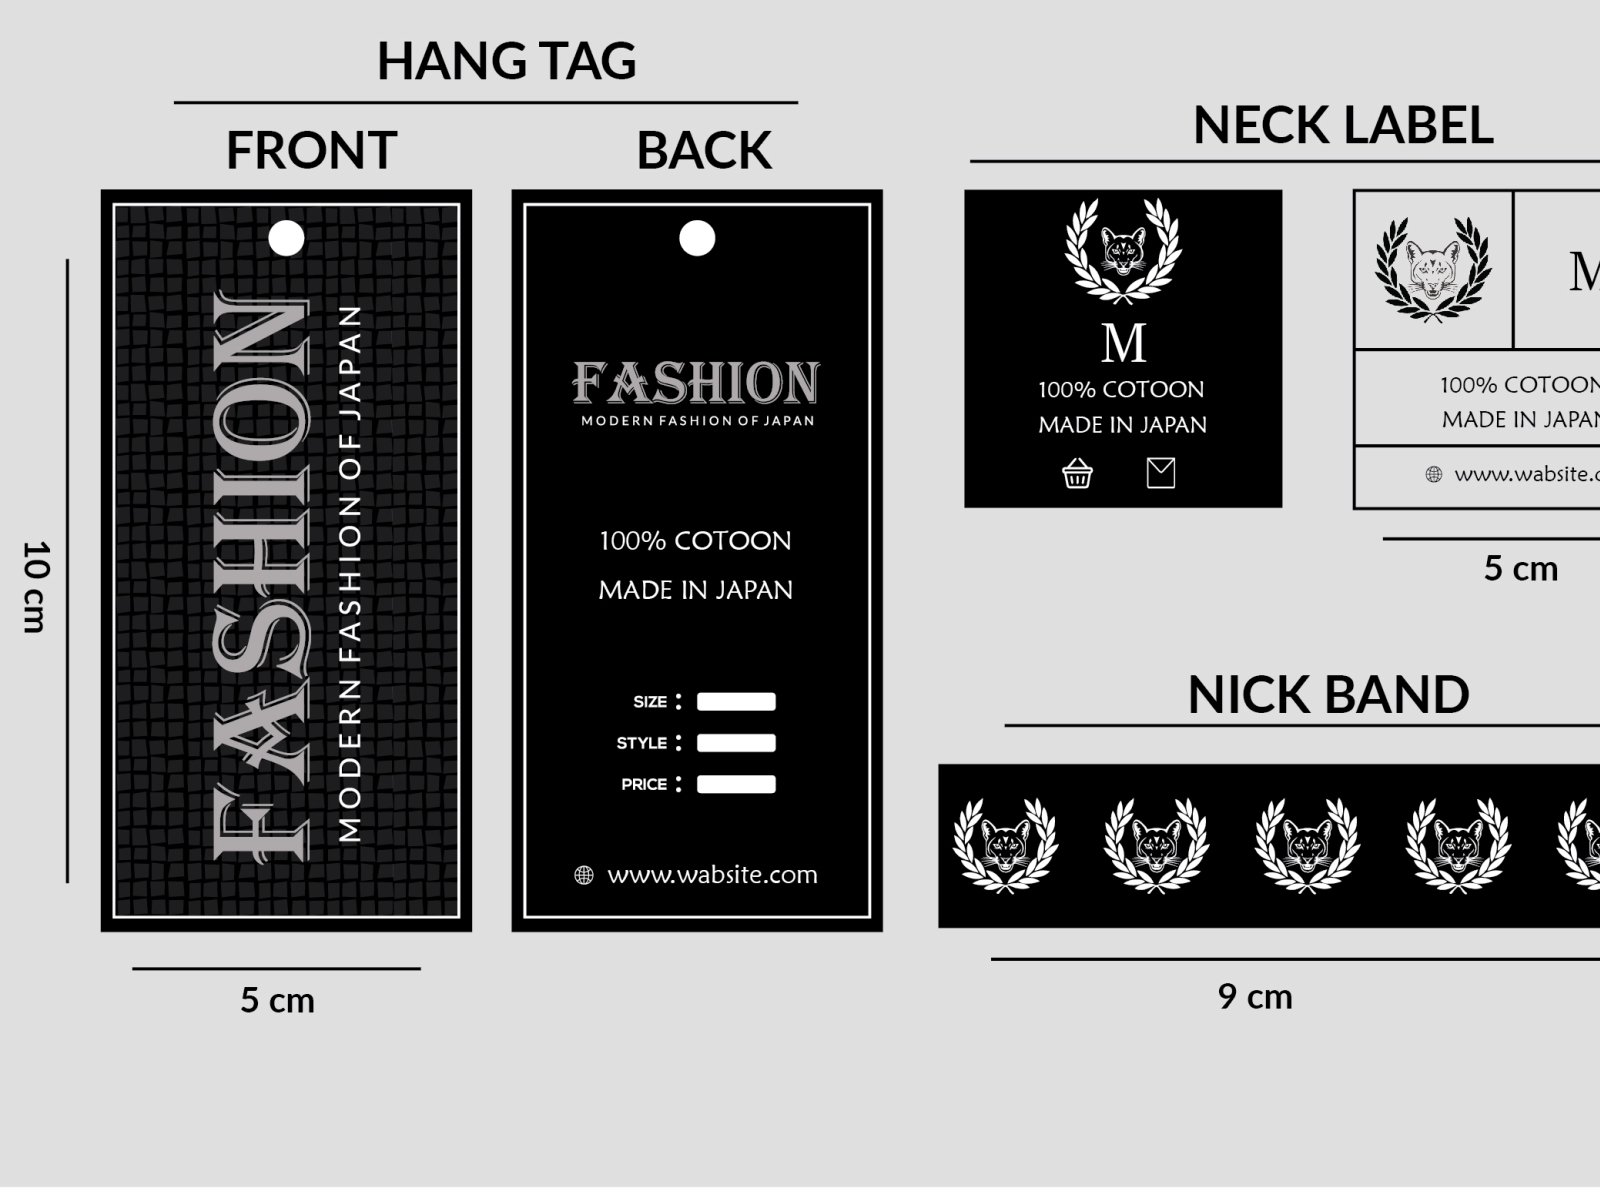 Hang tag Design by Designer_sumi on Dribbble